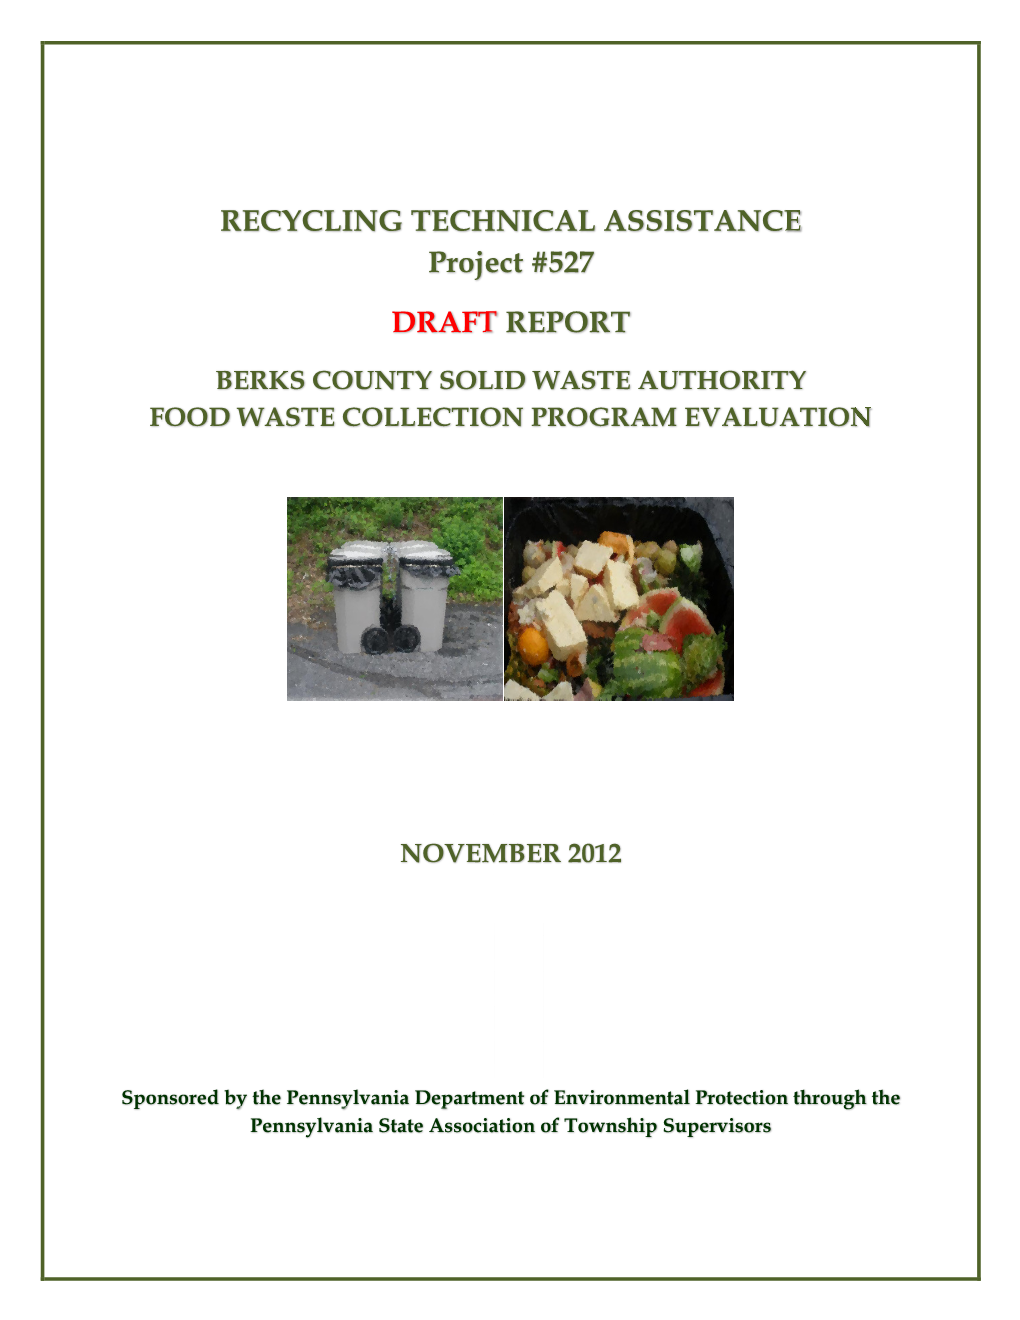 Berks County Solid Waste Authority Food Waste Collection Program Evaluation